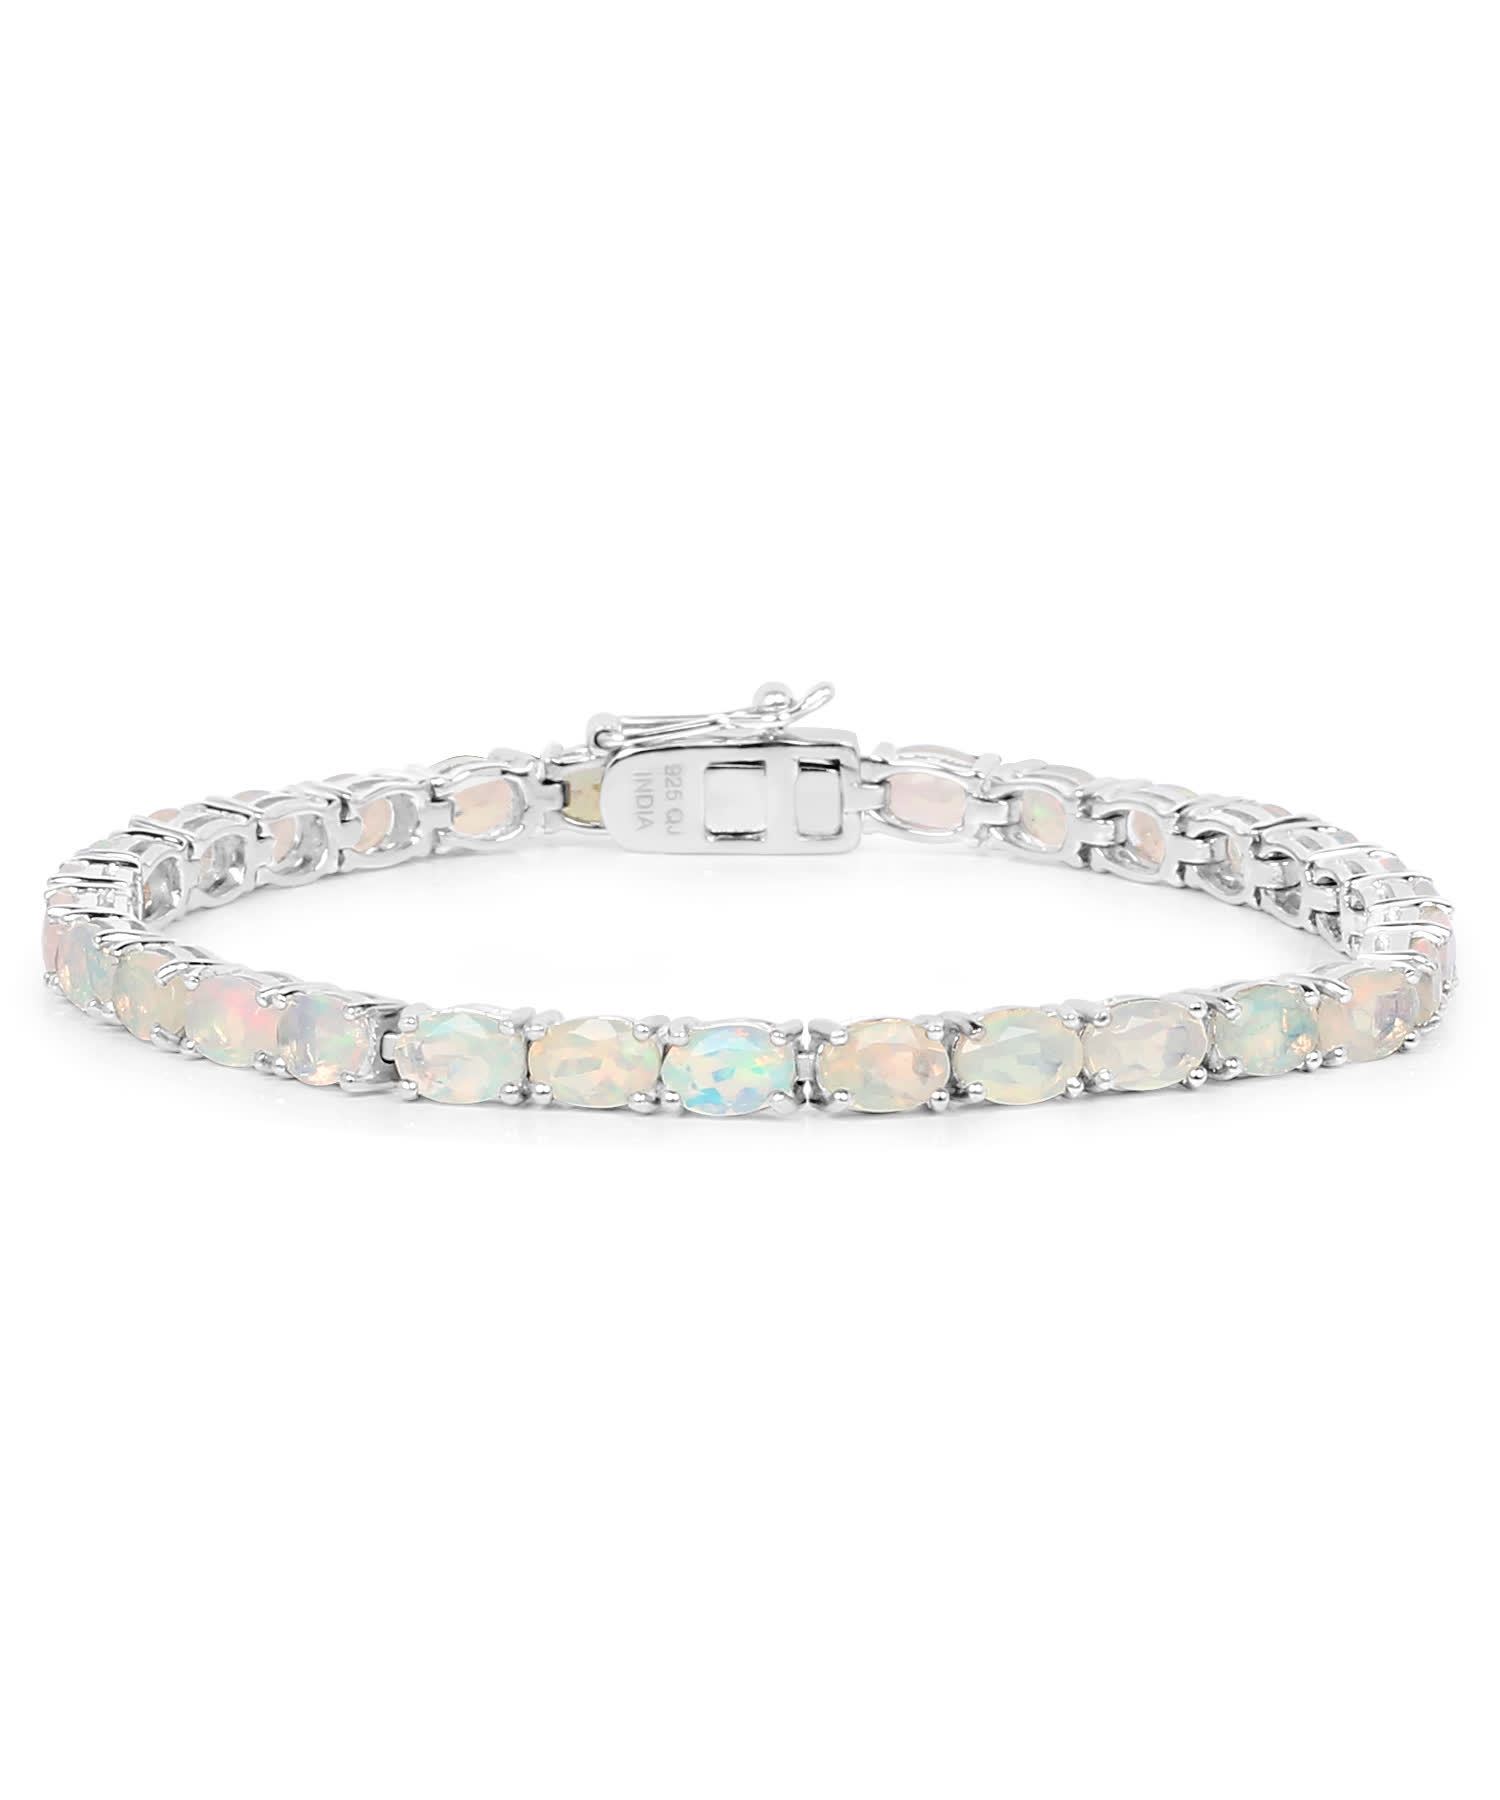 6.48ctw Natural Ethiopian Opal Rhodium Plated 925 Sterling Silver Tennis Bracelet View 2